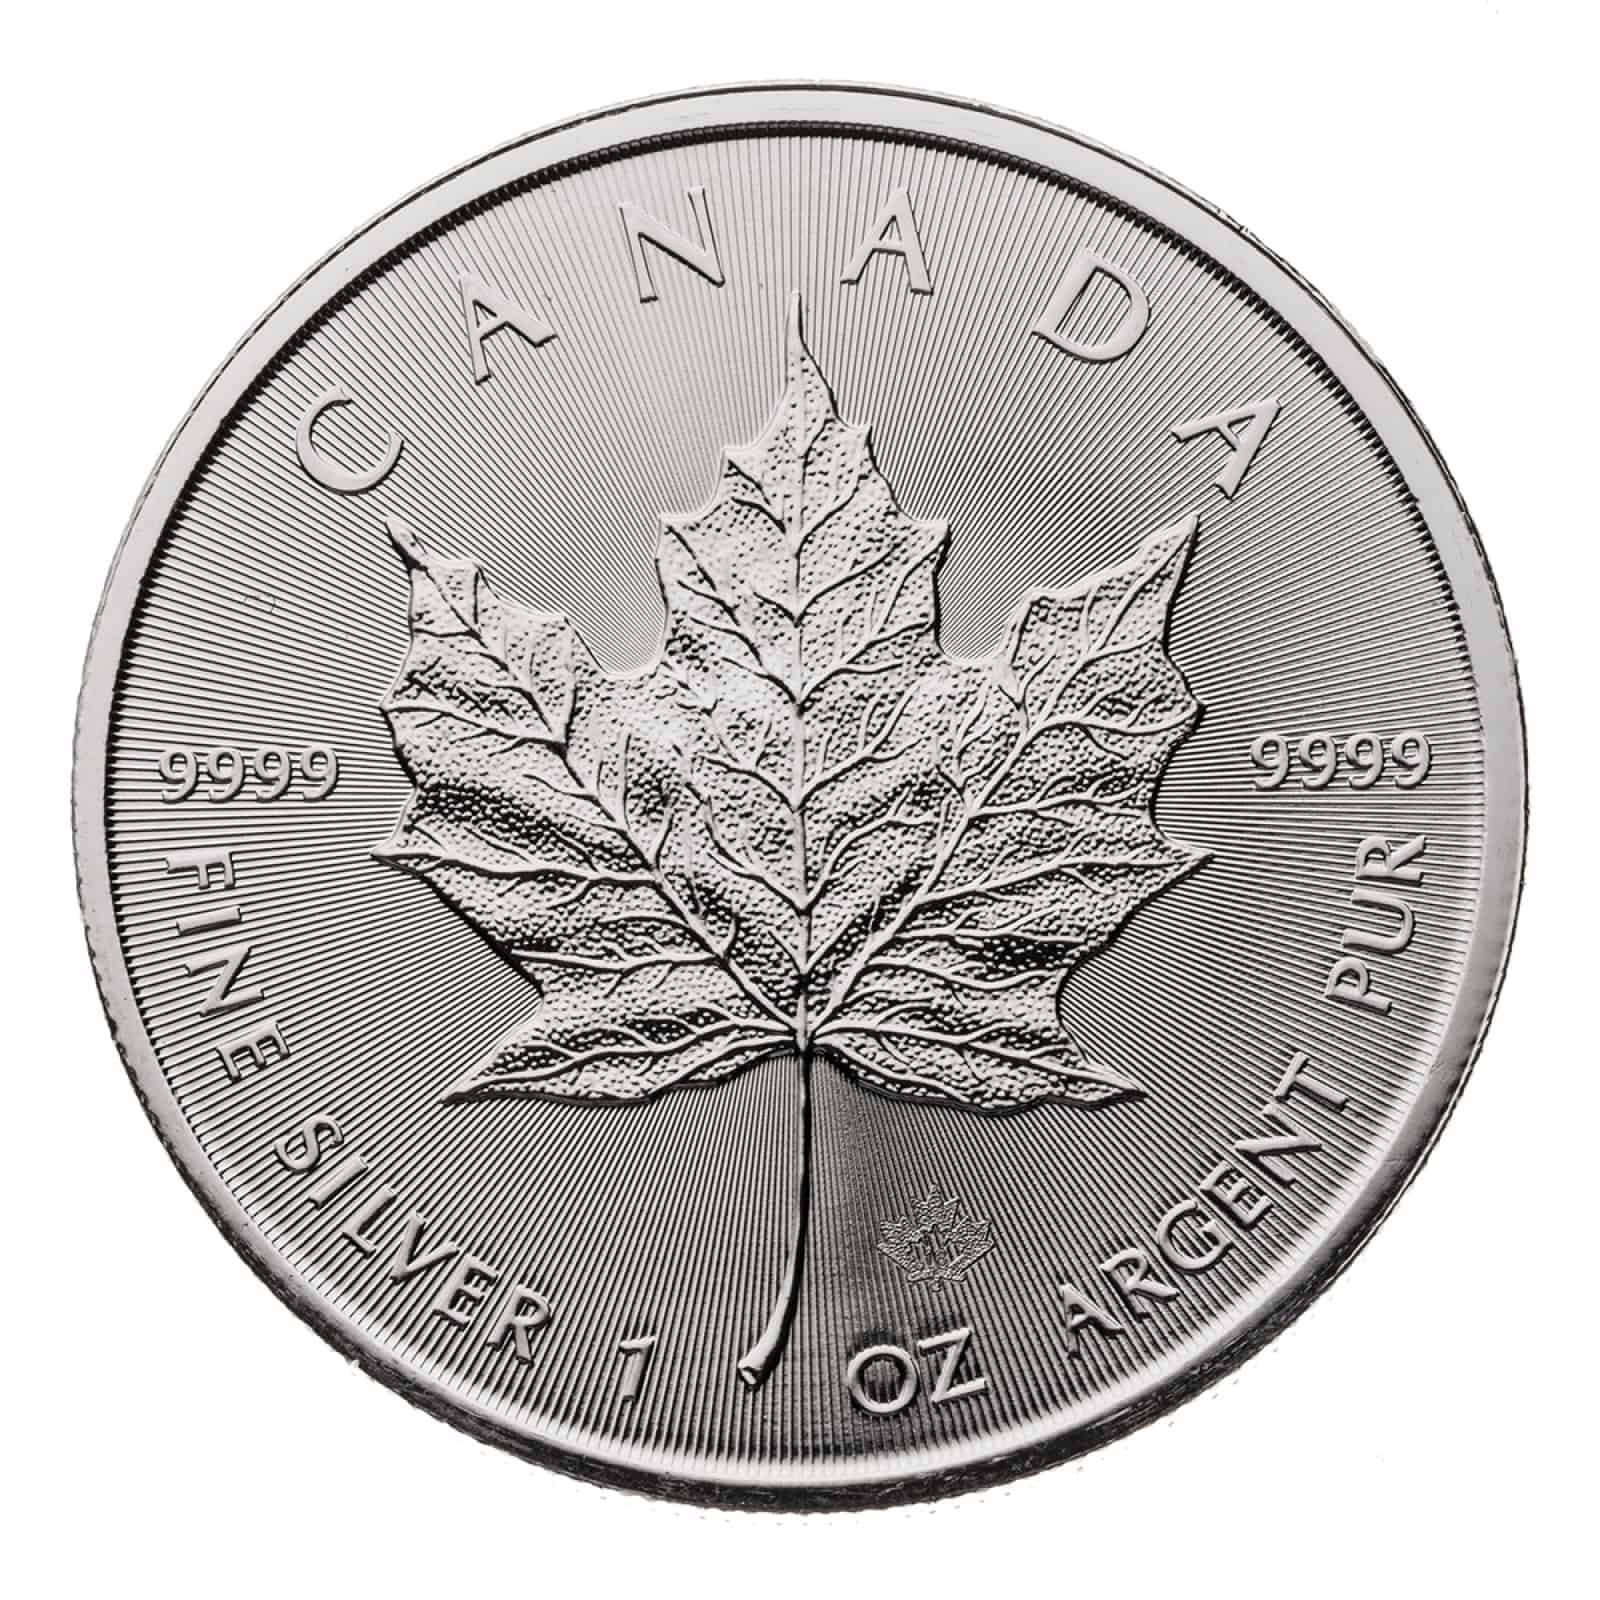 1-oz-canadian-silver-maple-coin-2018-tube-of-25-coins-gold-survival